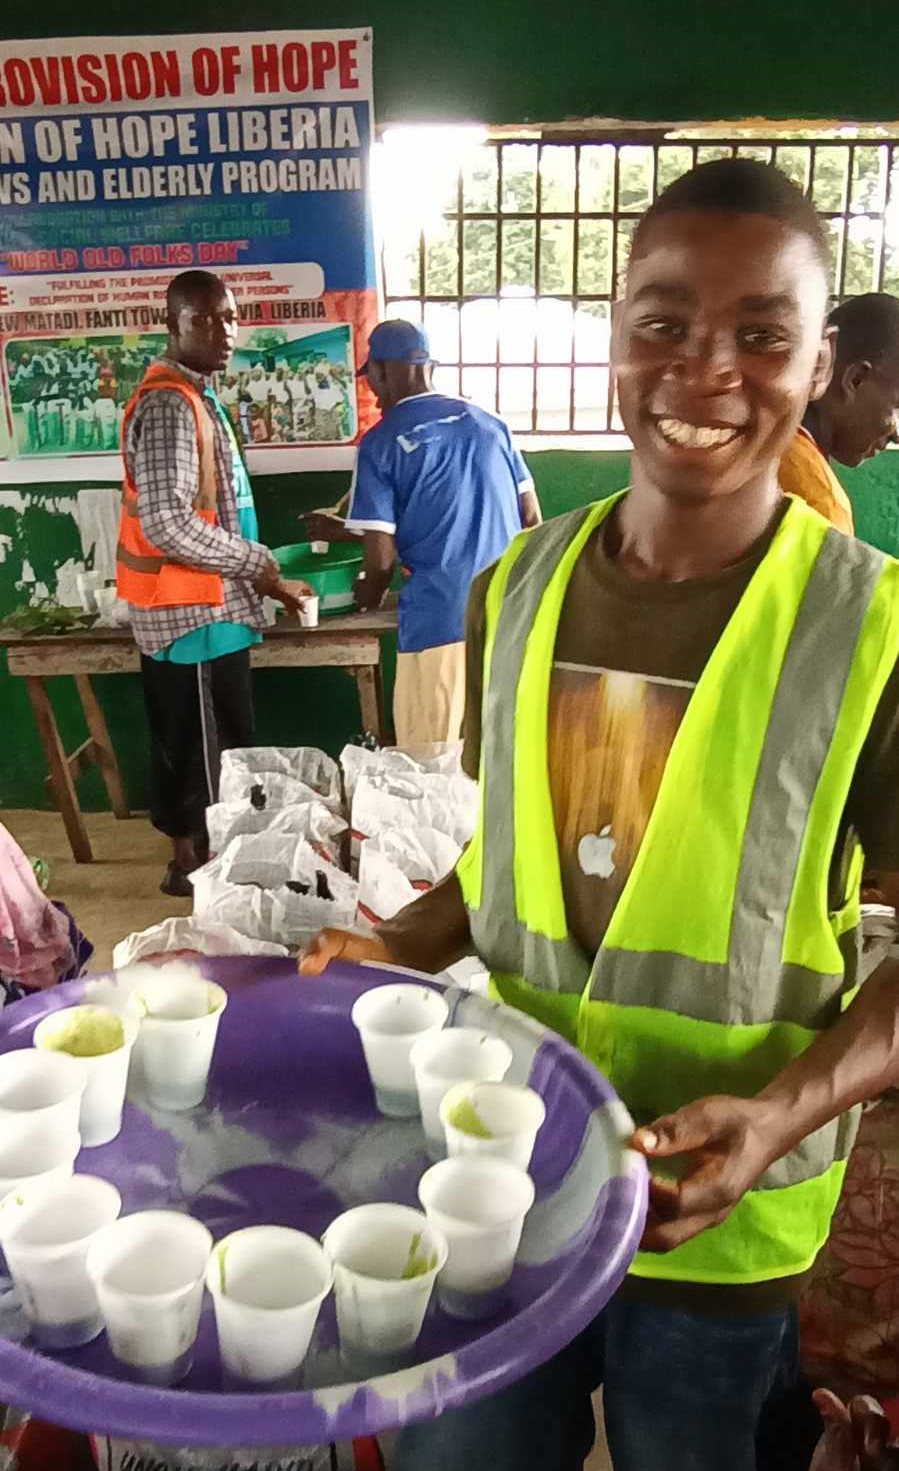 Jeremiah Karr is one of our volunteers handing out the moringa drinks.